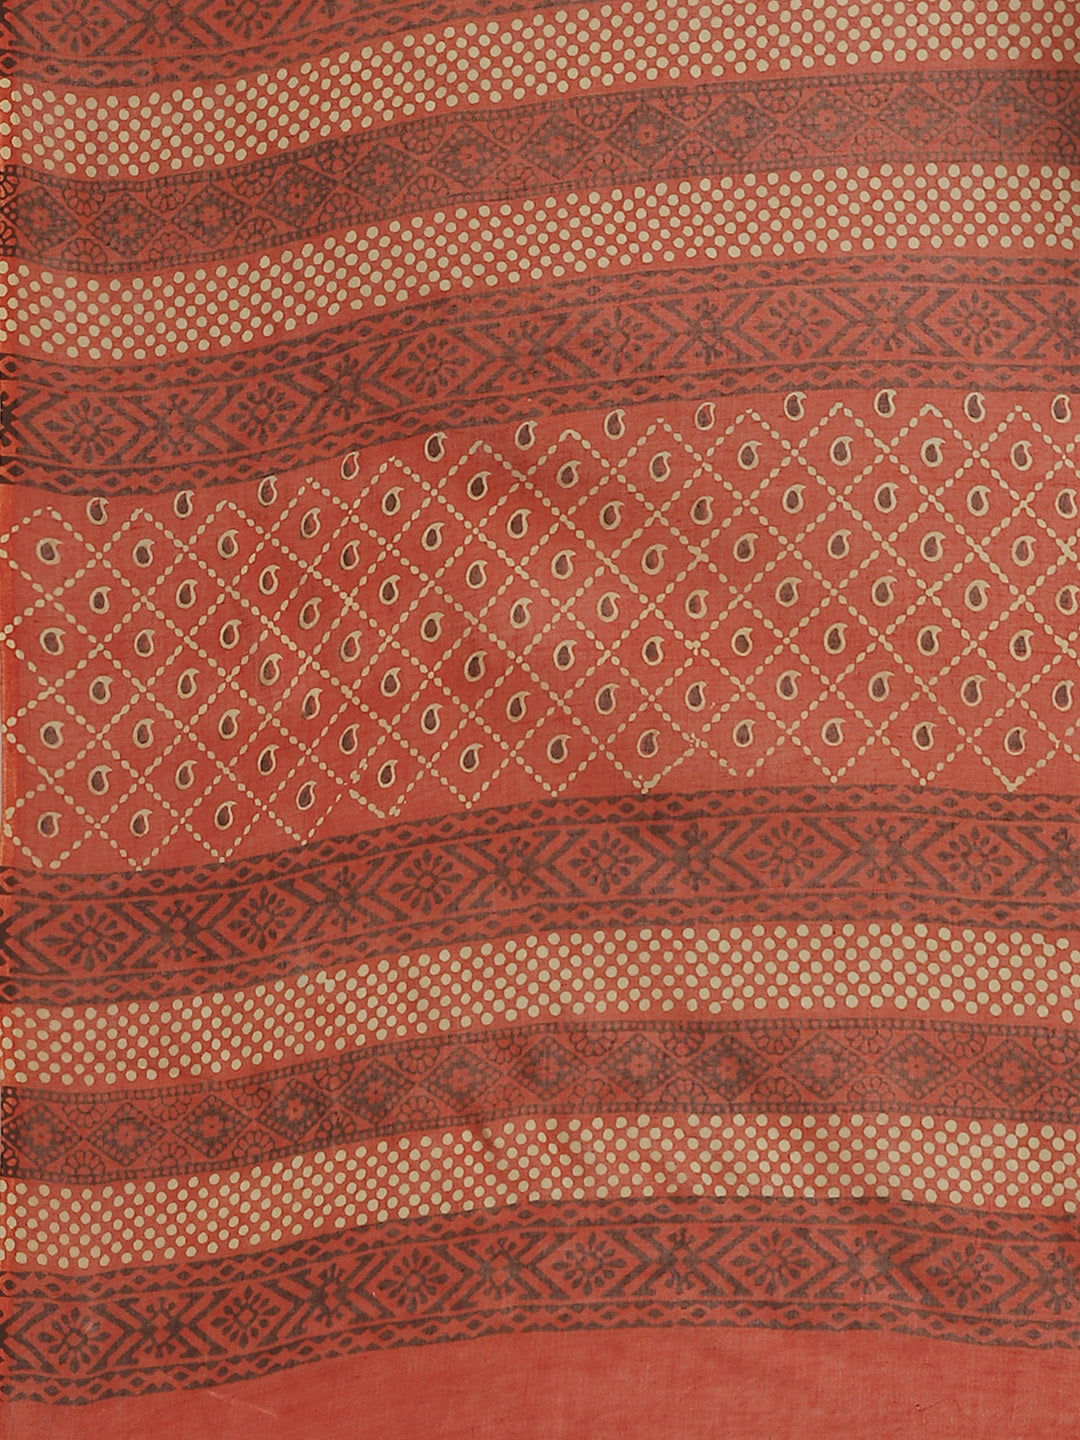 Brown and White, Kalakari India Pure Cotton Hand Block Printed Saree and Blouse BAPASA0100-Saree-Kalakari India-BAPASA0100-Block Print, Cotton, Geographical Indication, Hand Crafted, Heritage Prints, Natural Dyes, Red, Sarees, Sustainable Fabrics, Woven, Yellow-[Linen,Ethnic,wear,Fashionista,Handloom,Handicraft,Indigo,blockprint,block,print,Cotton,Chanderi,Blue, latest,classy,party,bollywood,trendy,summer,style,traditional,formal,elegant,unique,style,hand,block,print, dabu,booti,gift,present,gla